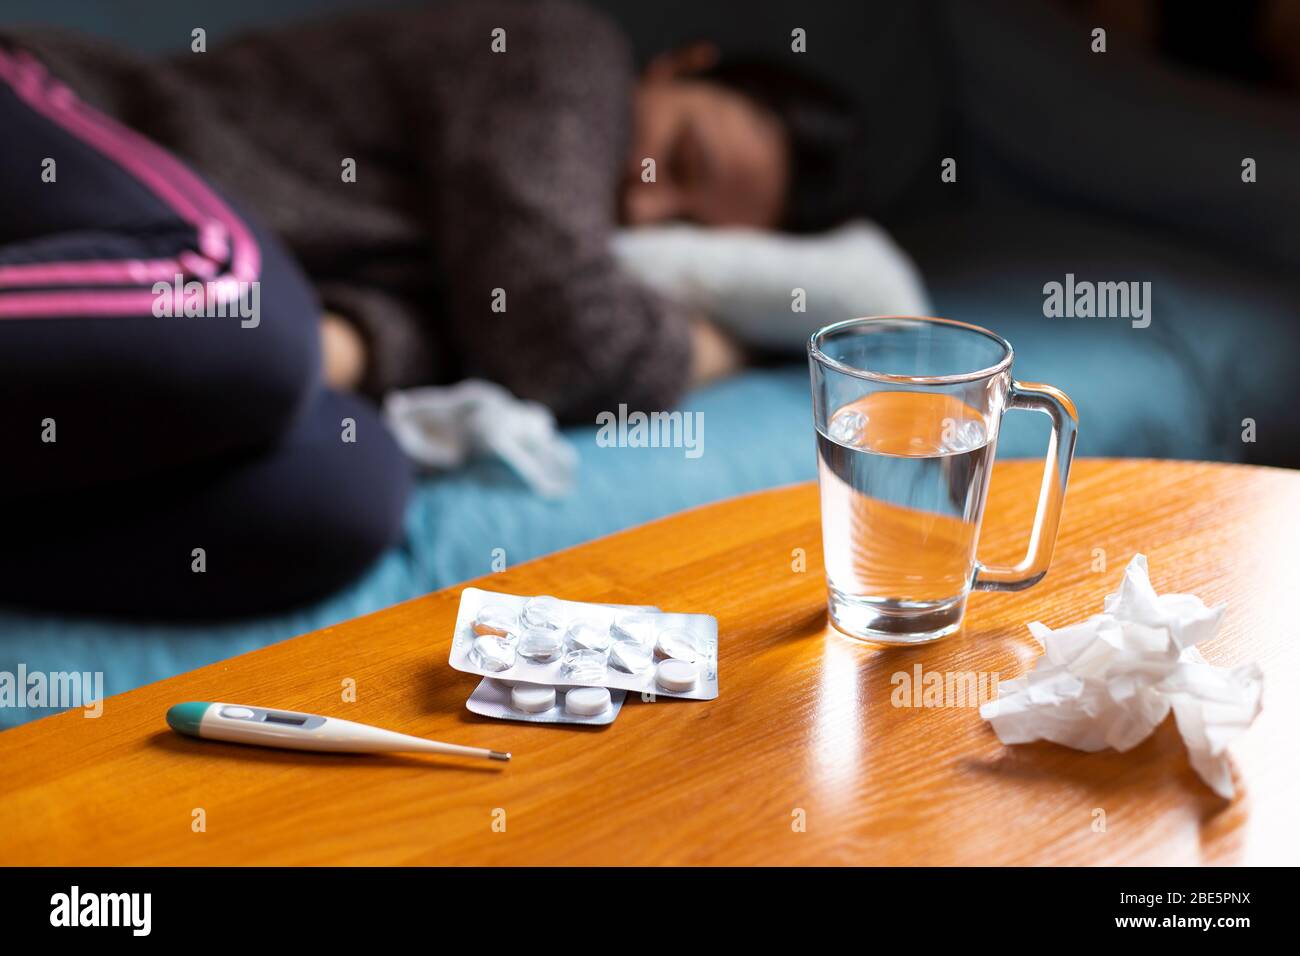 Woman feeling sick lying on sofa and have some medications on table Stock Photo